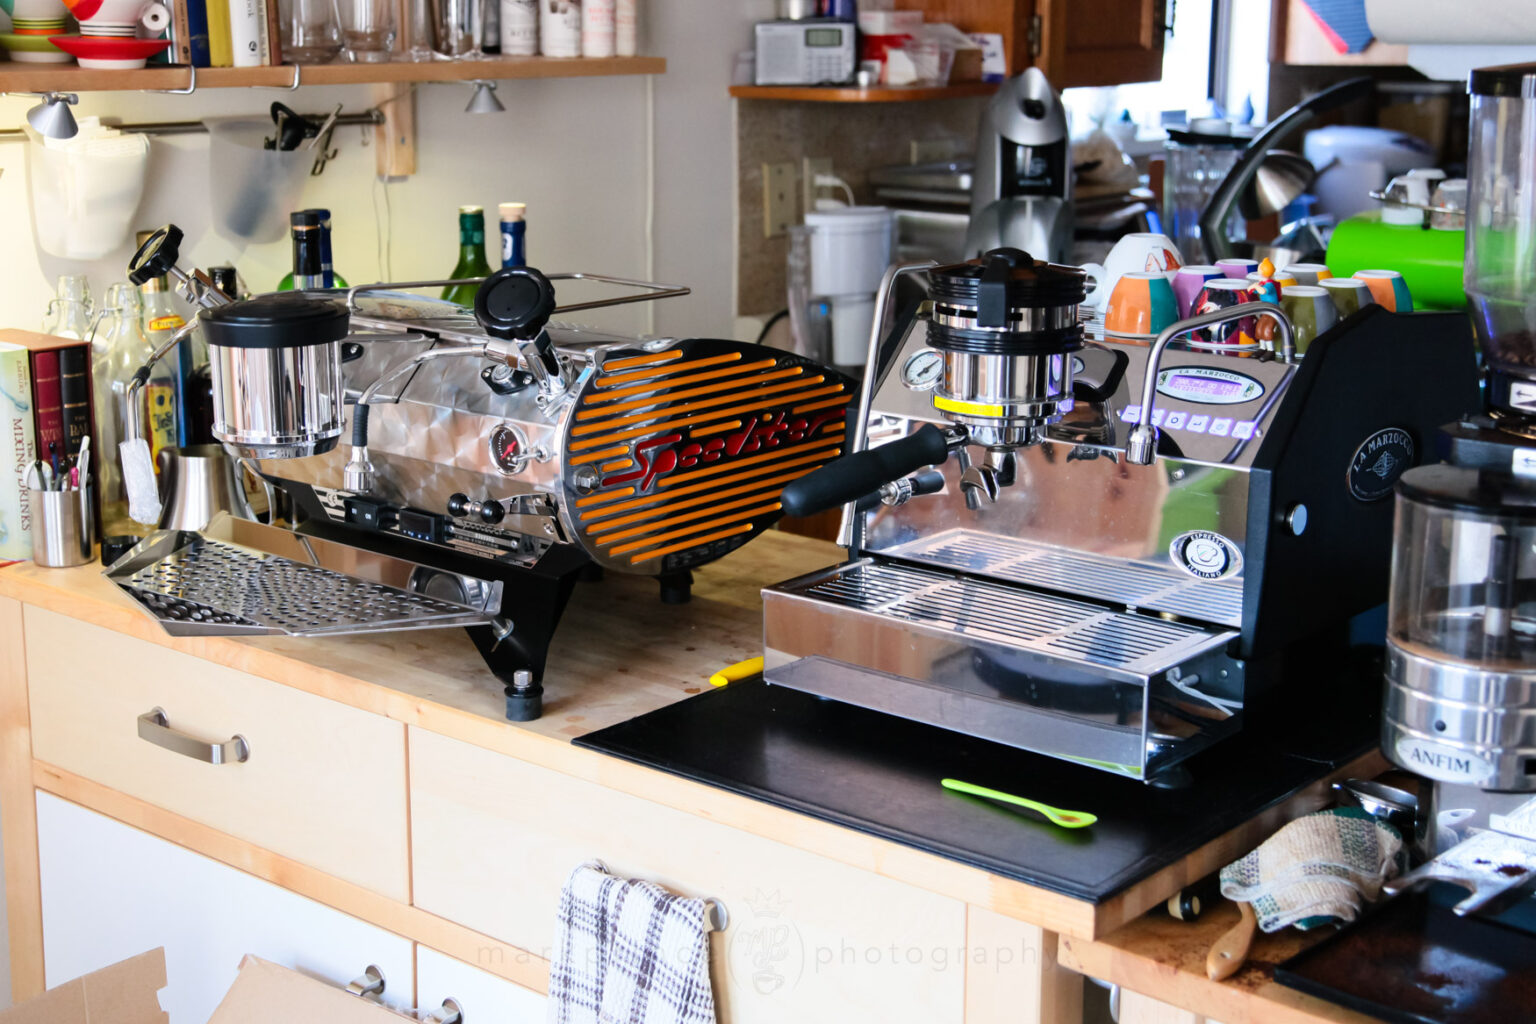 The Speedster next to a La Marzocco GS3